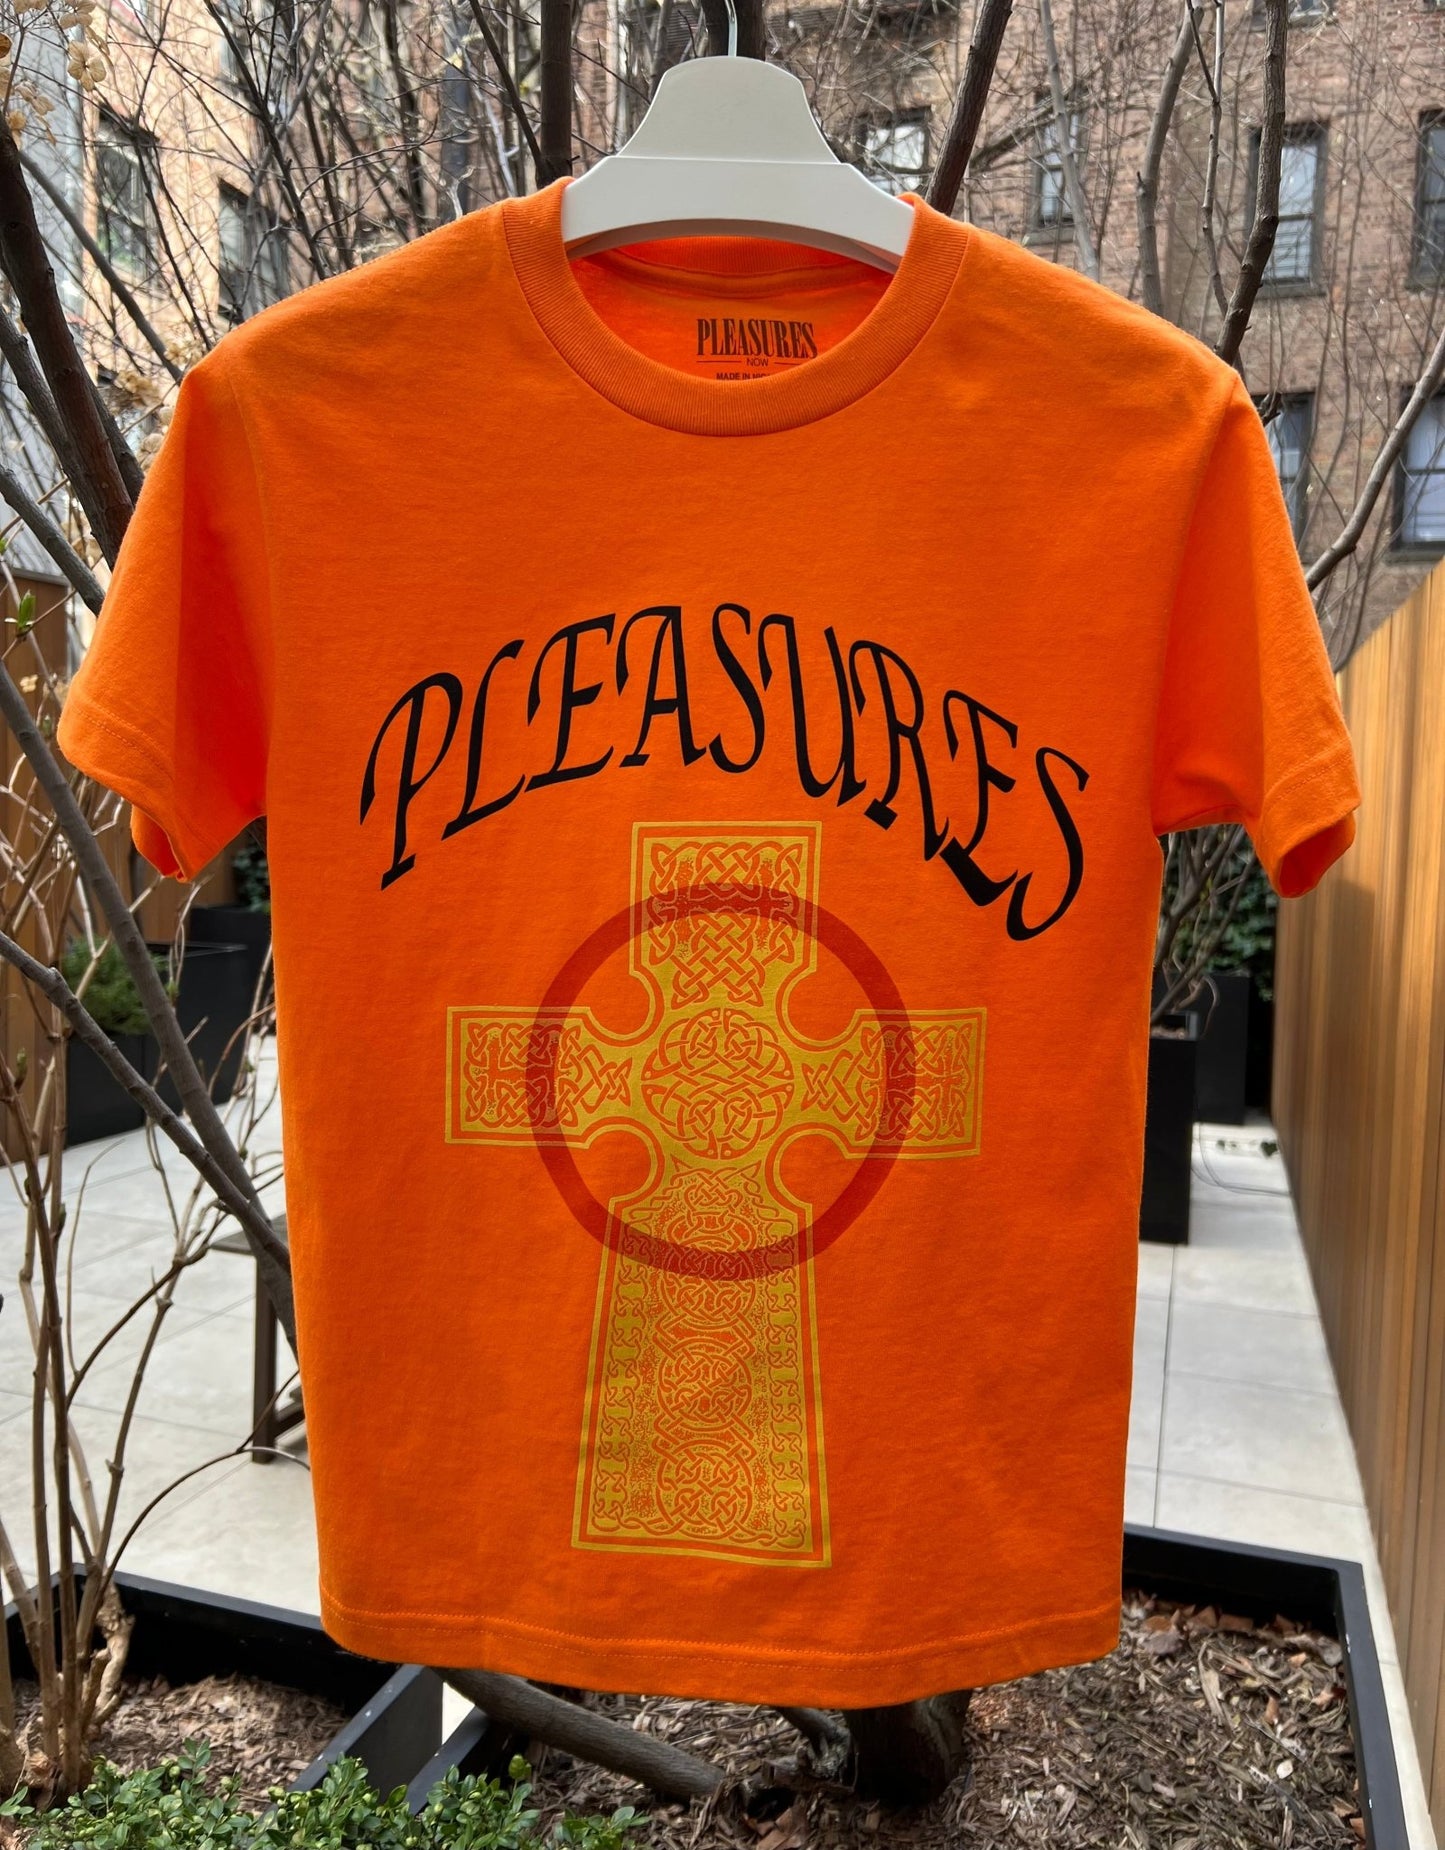 VEGAN T-SHIRT ORANGE by PLEASURES, with a large cross design in the center, displayed outdoors.